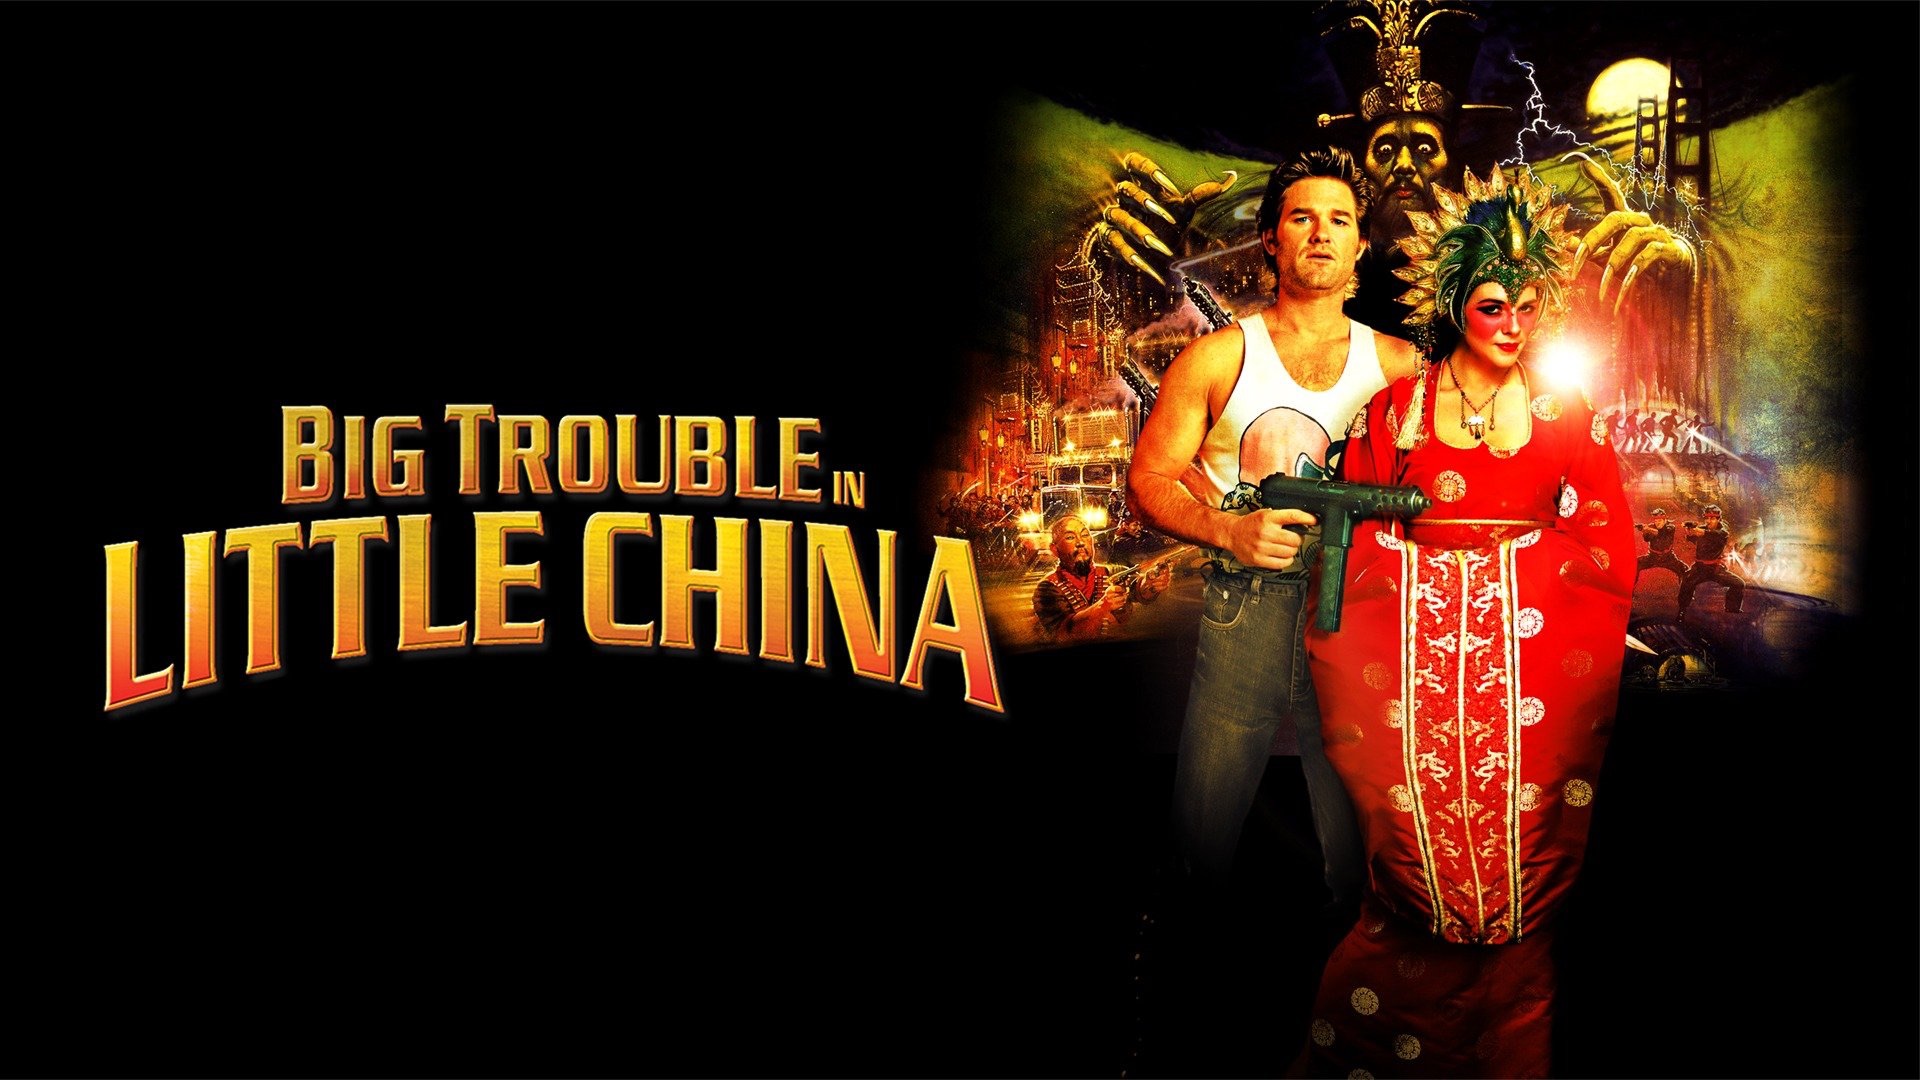 Movie Big Trouble In Little China HD Wallpaper | Background Image